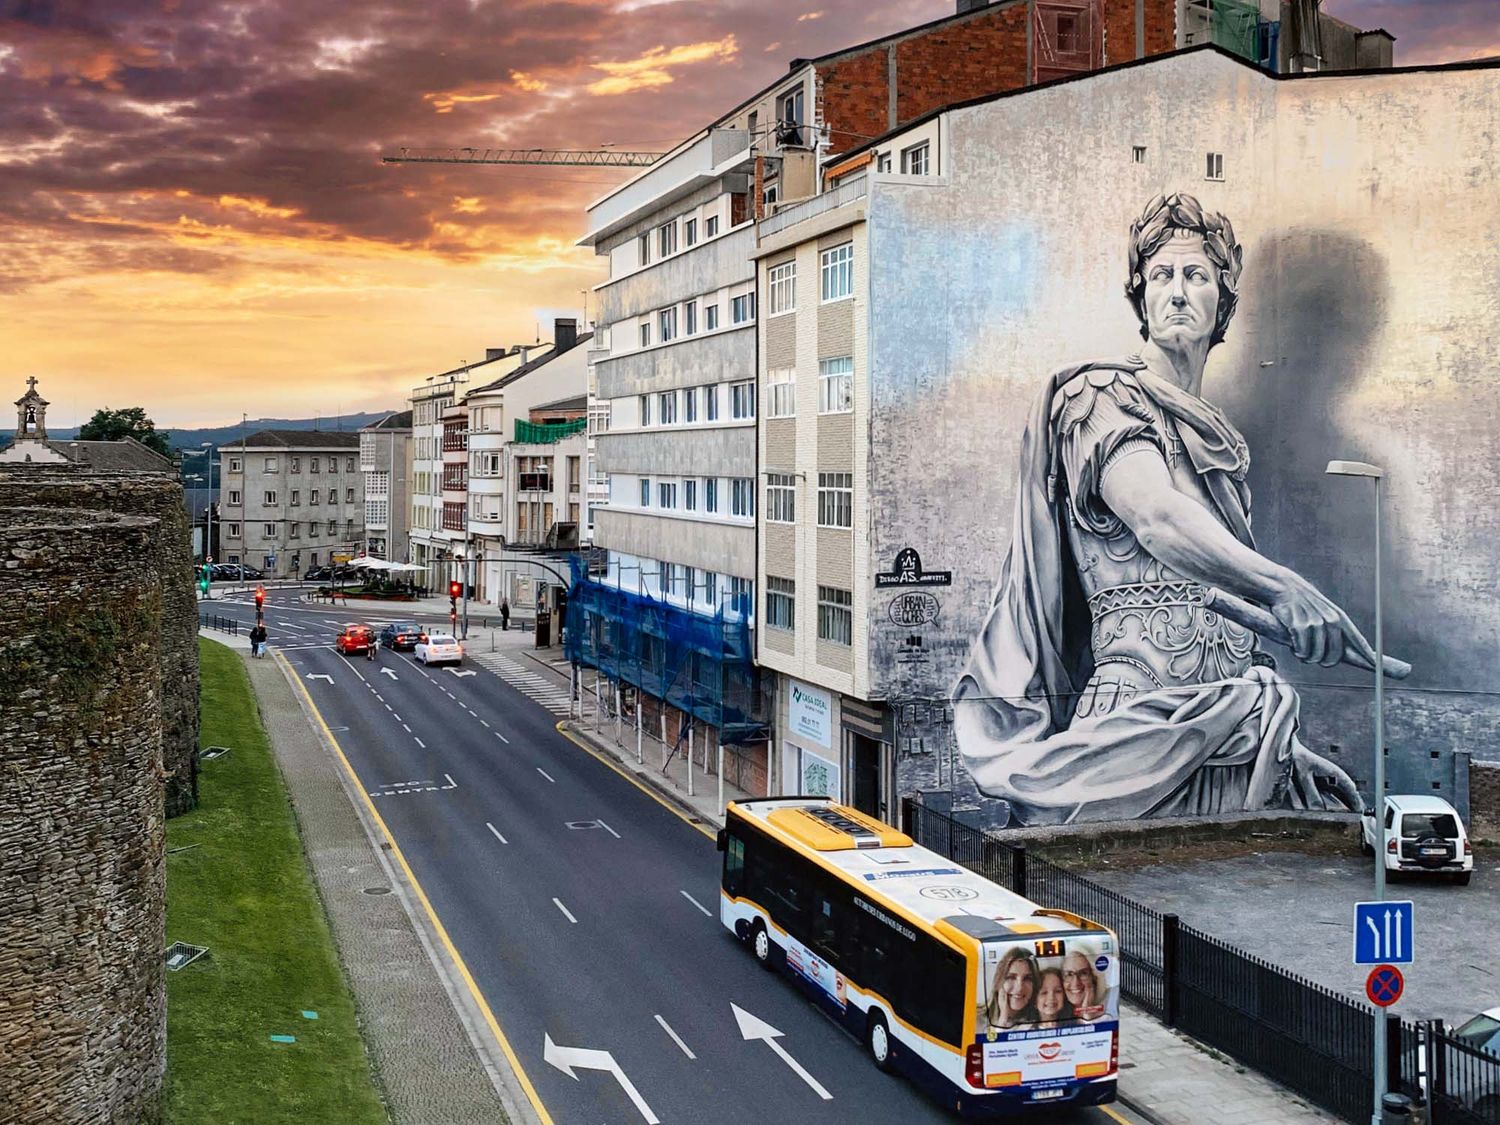 This portrait of Julius Caesar made by Diego AS in Lugo didn’t steal his number one position in the best of 2021, Street Art is definitively an amazing artistic movement (©Joaquin Caba).